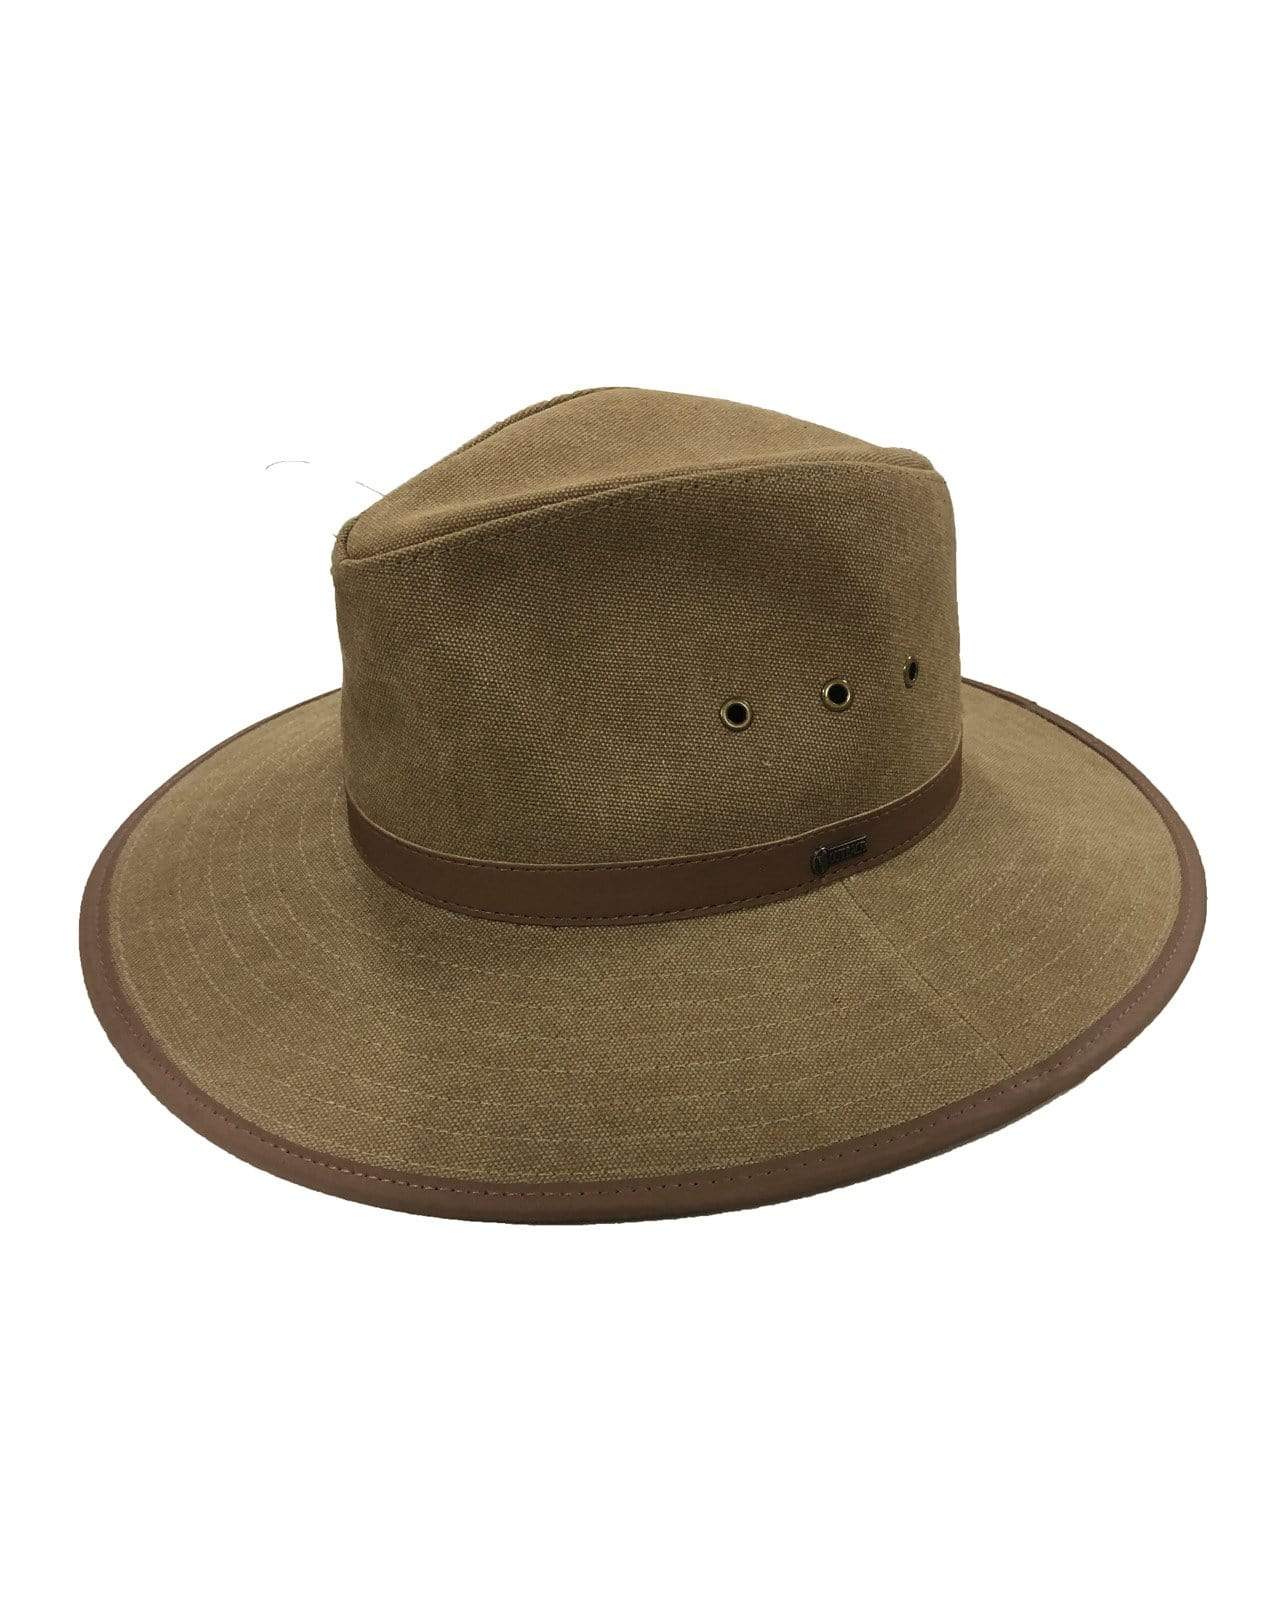 Outback Trading Company Kennet Creek Desert Sand / S 14850-DSD-SM 789043377156 Hats